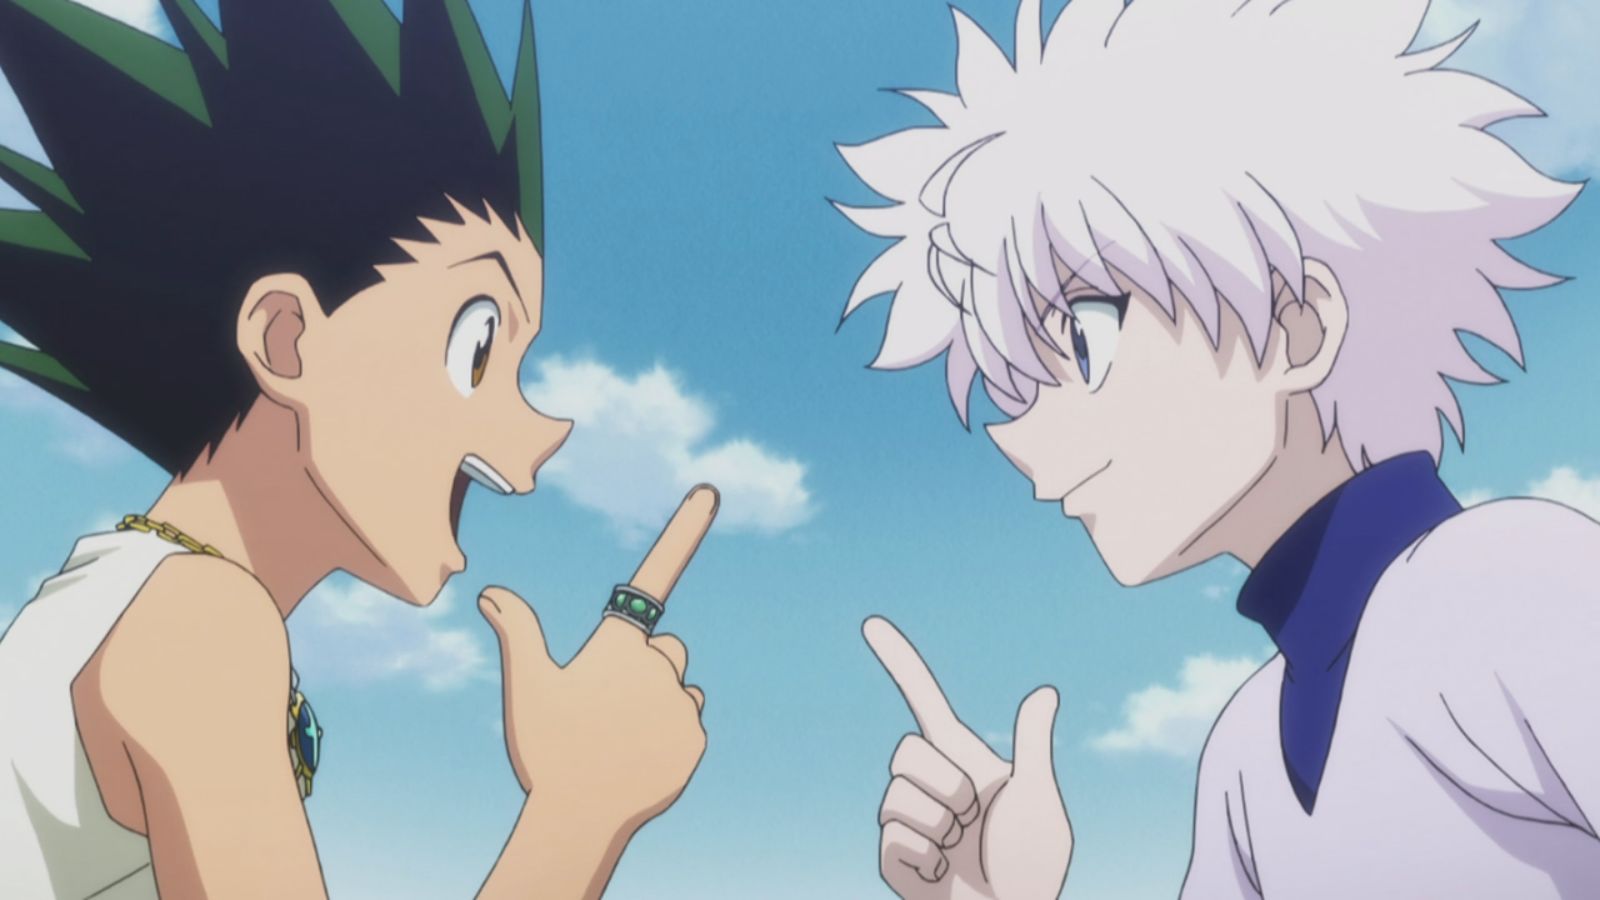 Gon and Killua point at each other